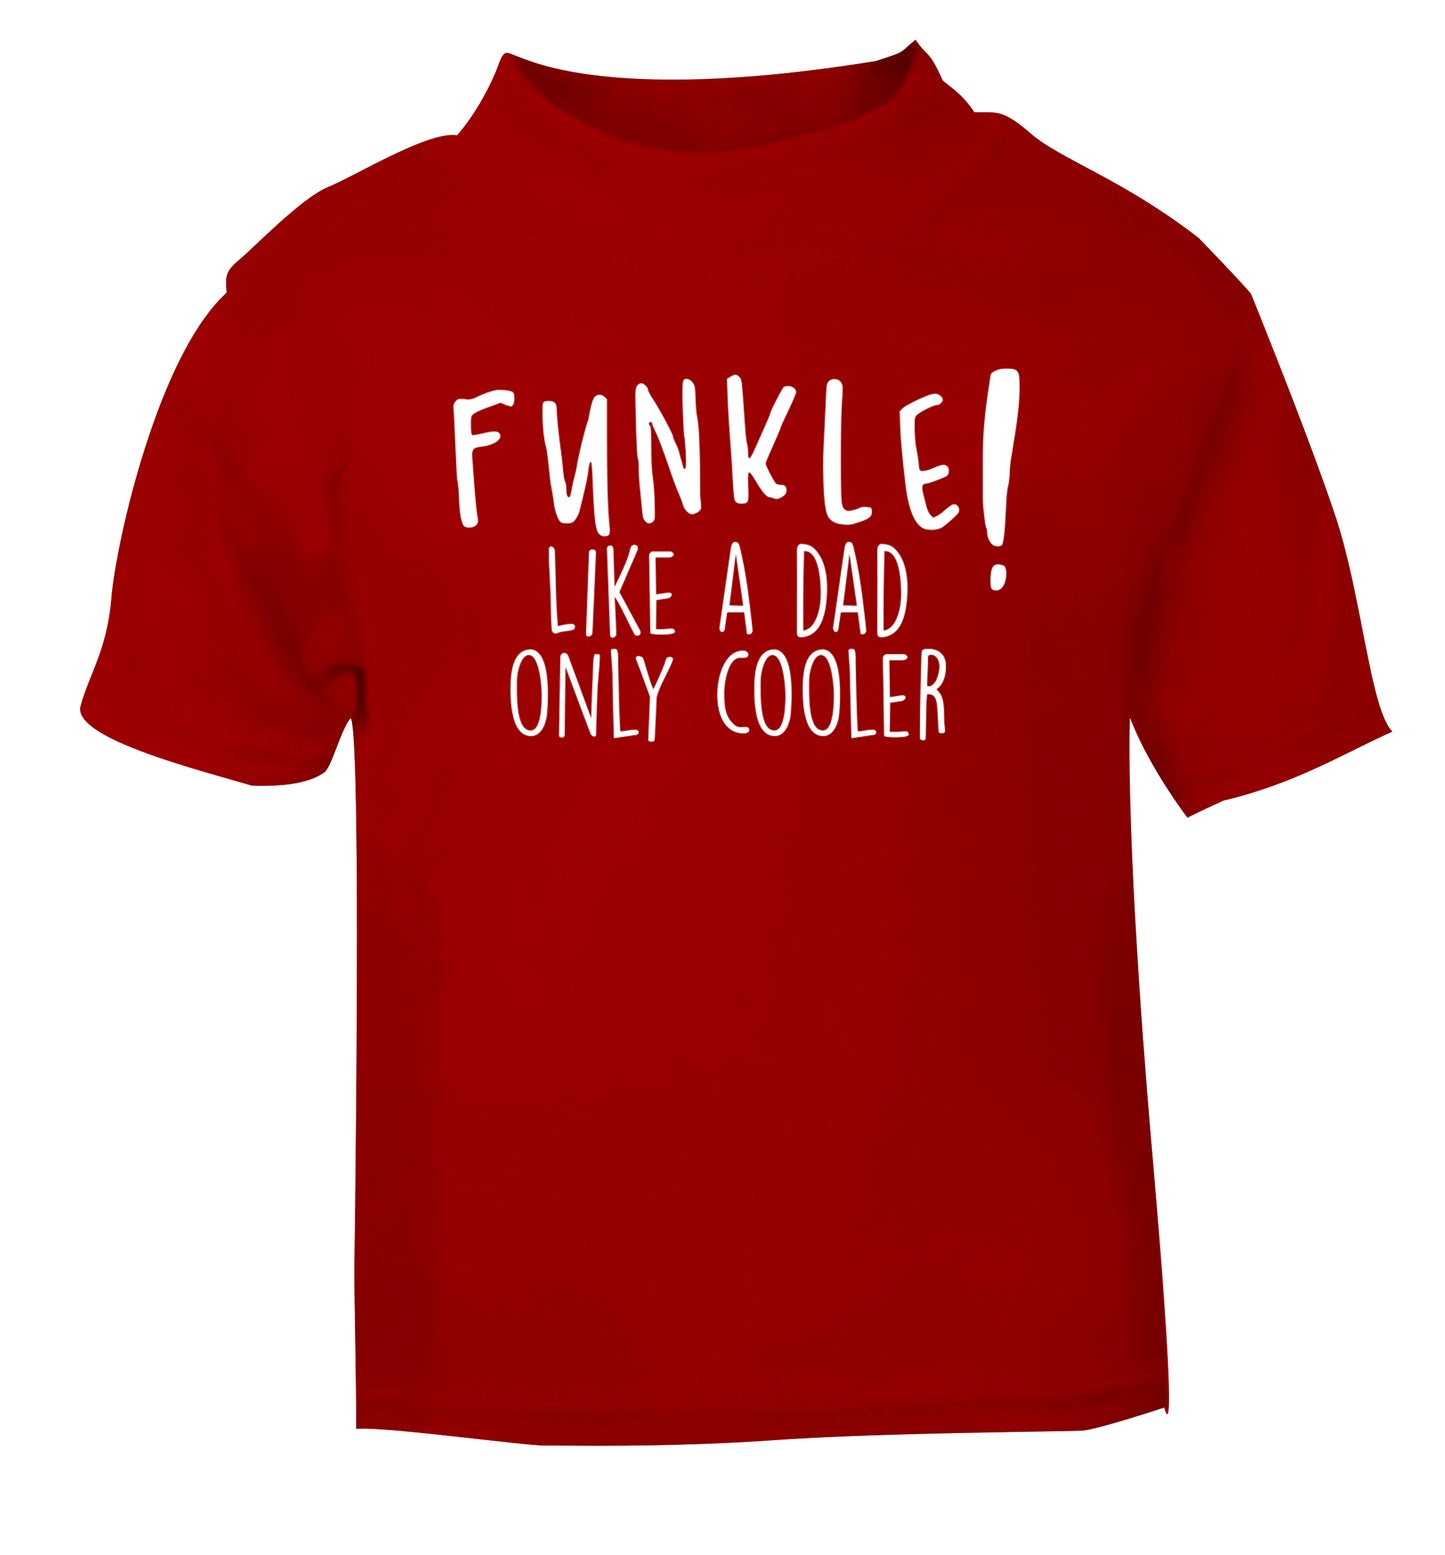 Funkle Like a Dad Only Cooler red Baby Toddler Tshirt 2 Years